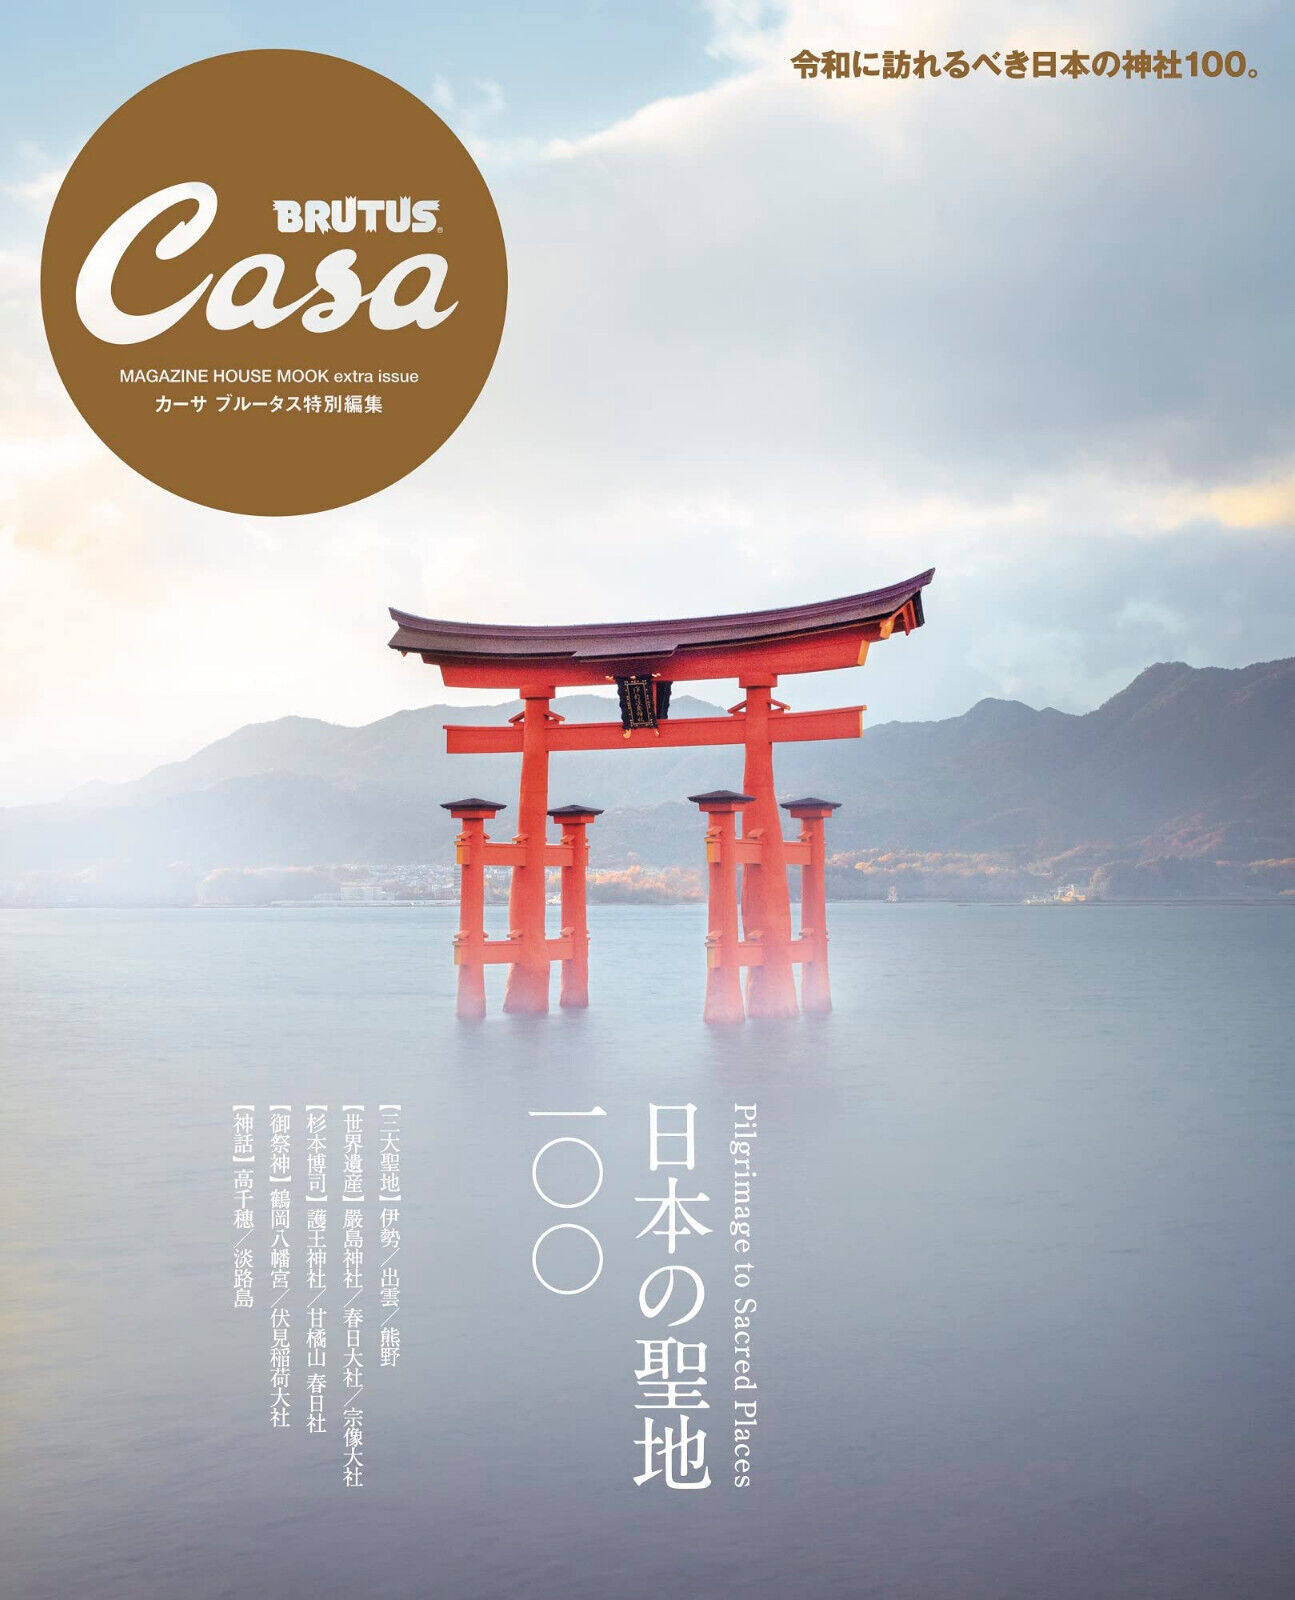 Casa BRUTUS Special Edition Pilgrimage to Sacred Places in Japan